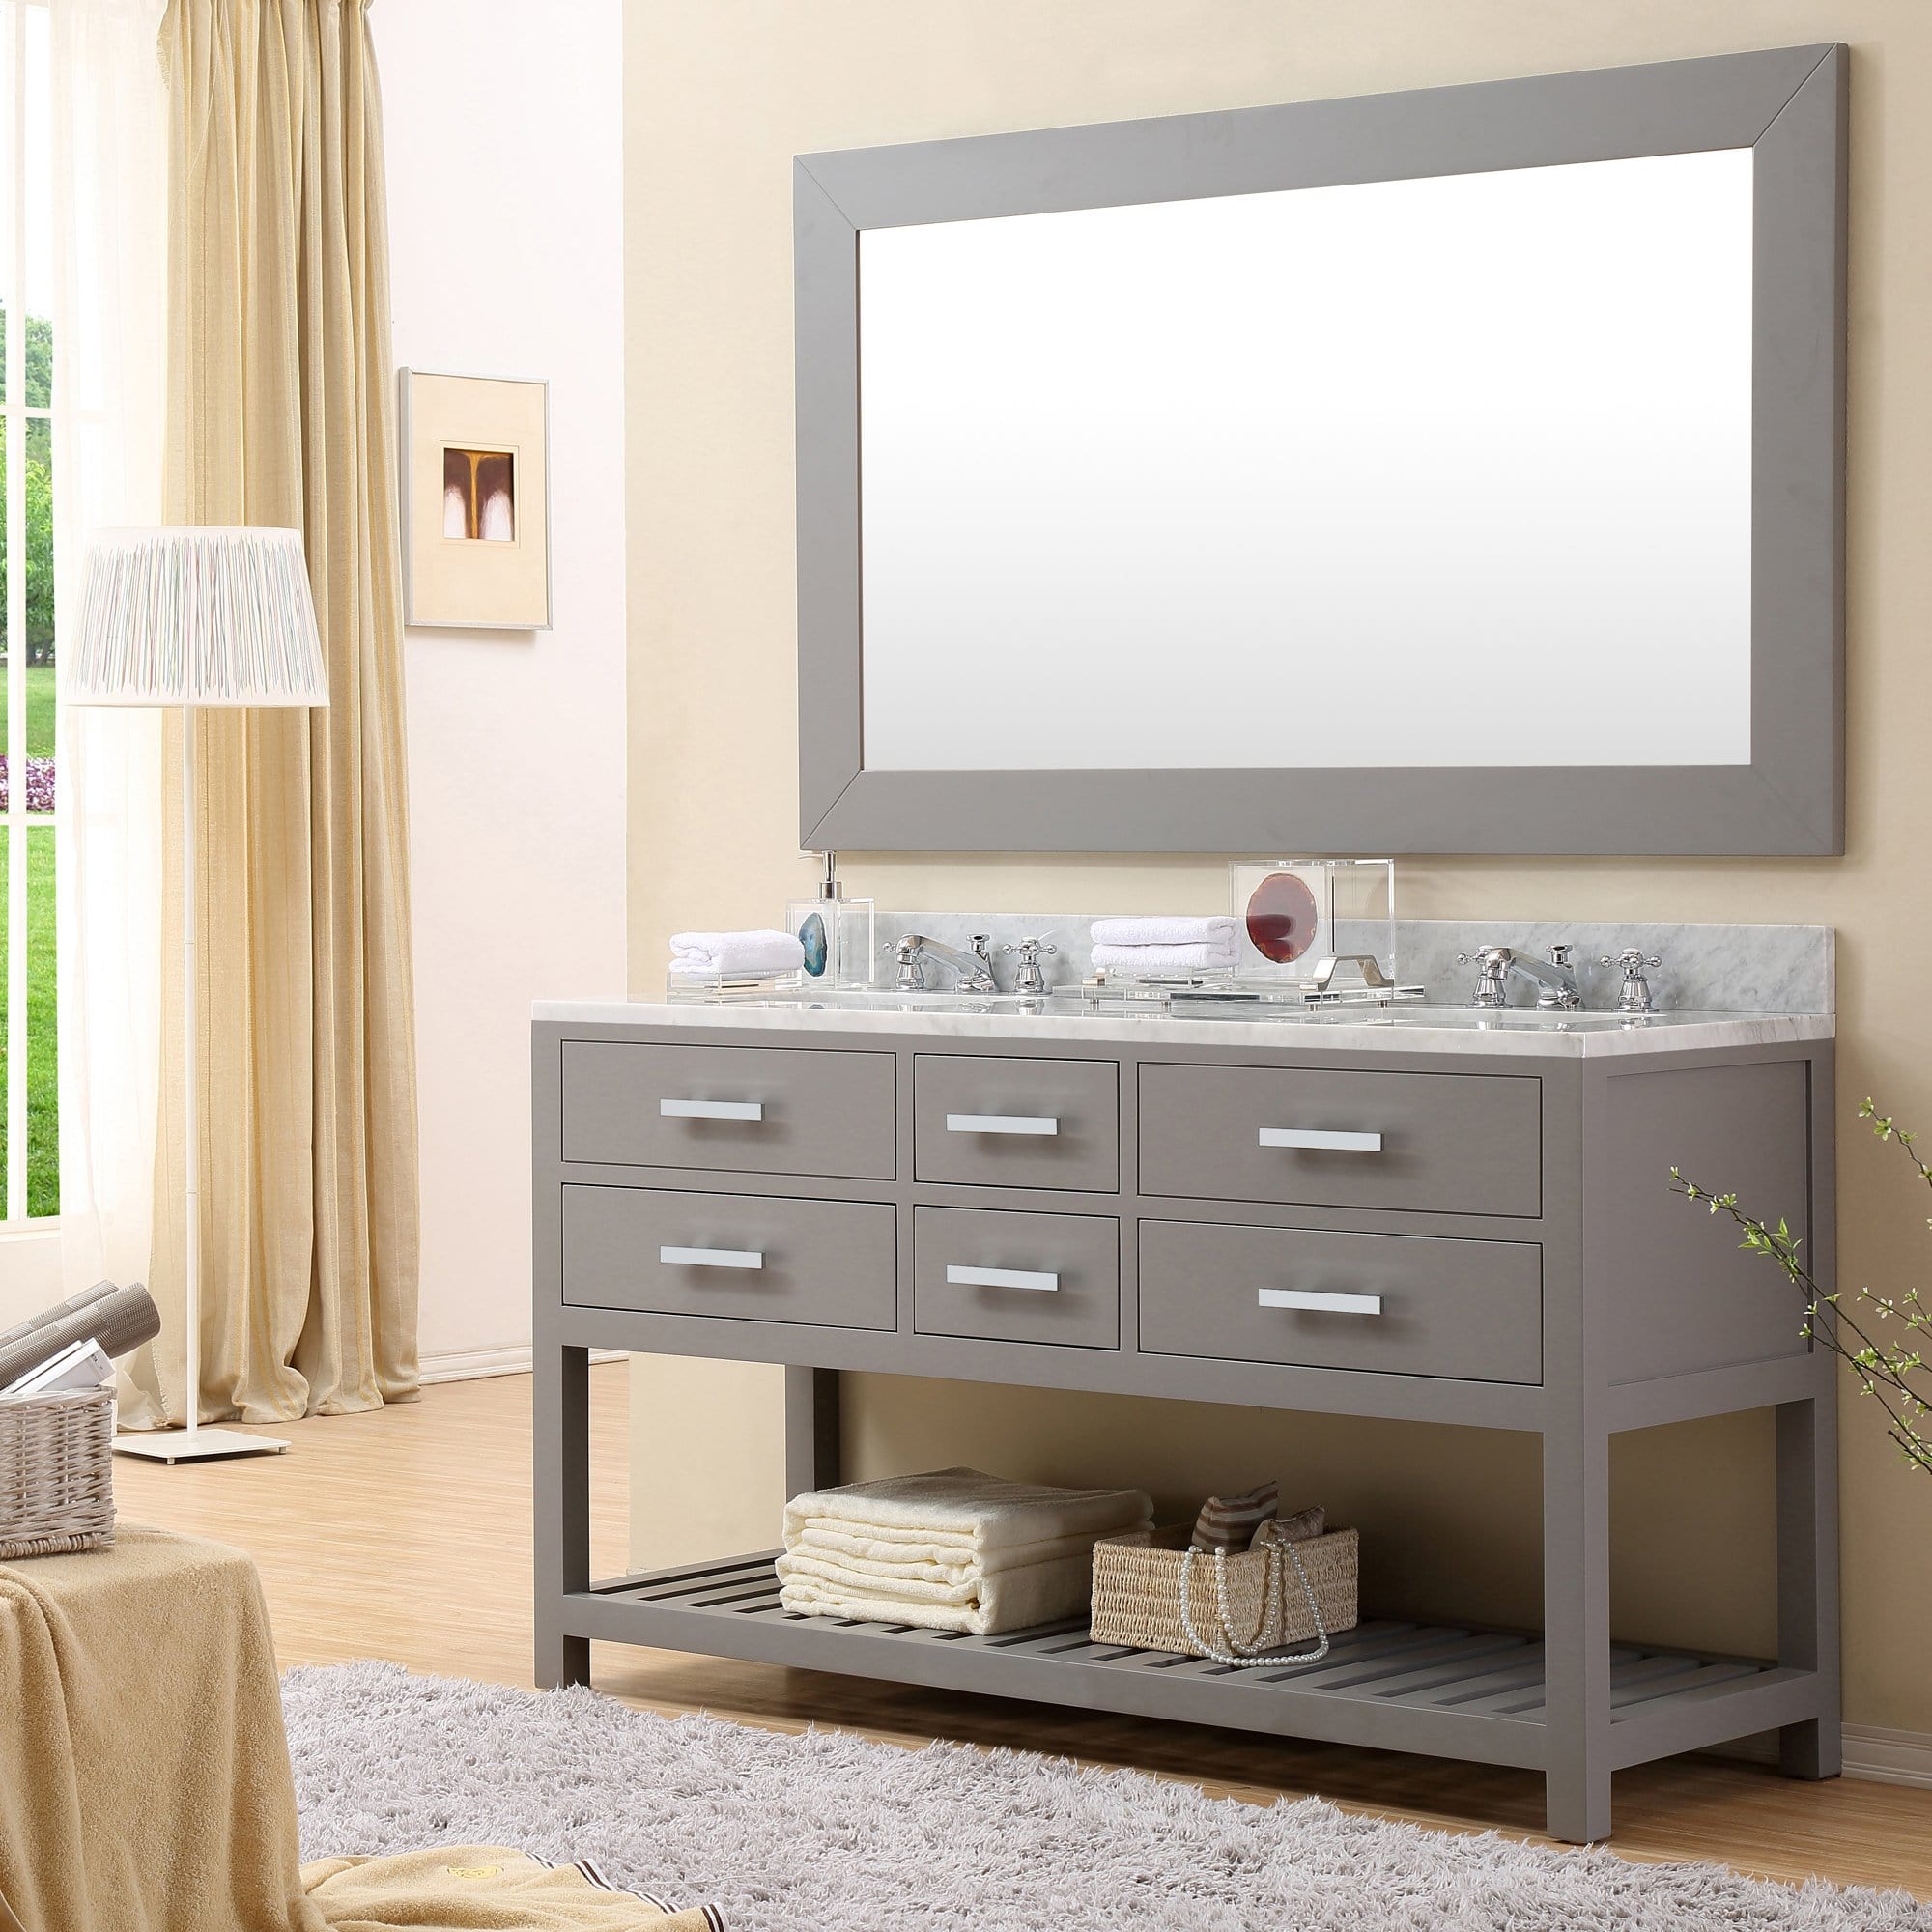 Water Creation 60 Inch Cashmere Grey Double Sink Bathroom Vanity With Matching Framed Mirror And Faucet From The Madalyn Collection - Molaix700621683261Bathroom vanityMA60CW01CG-R60BX0901